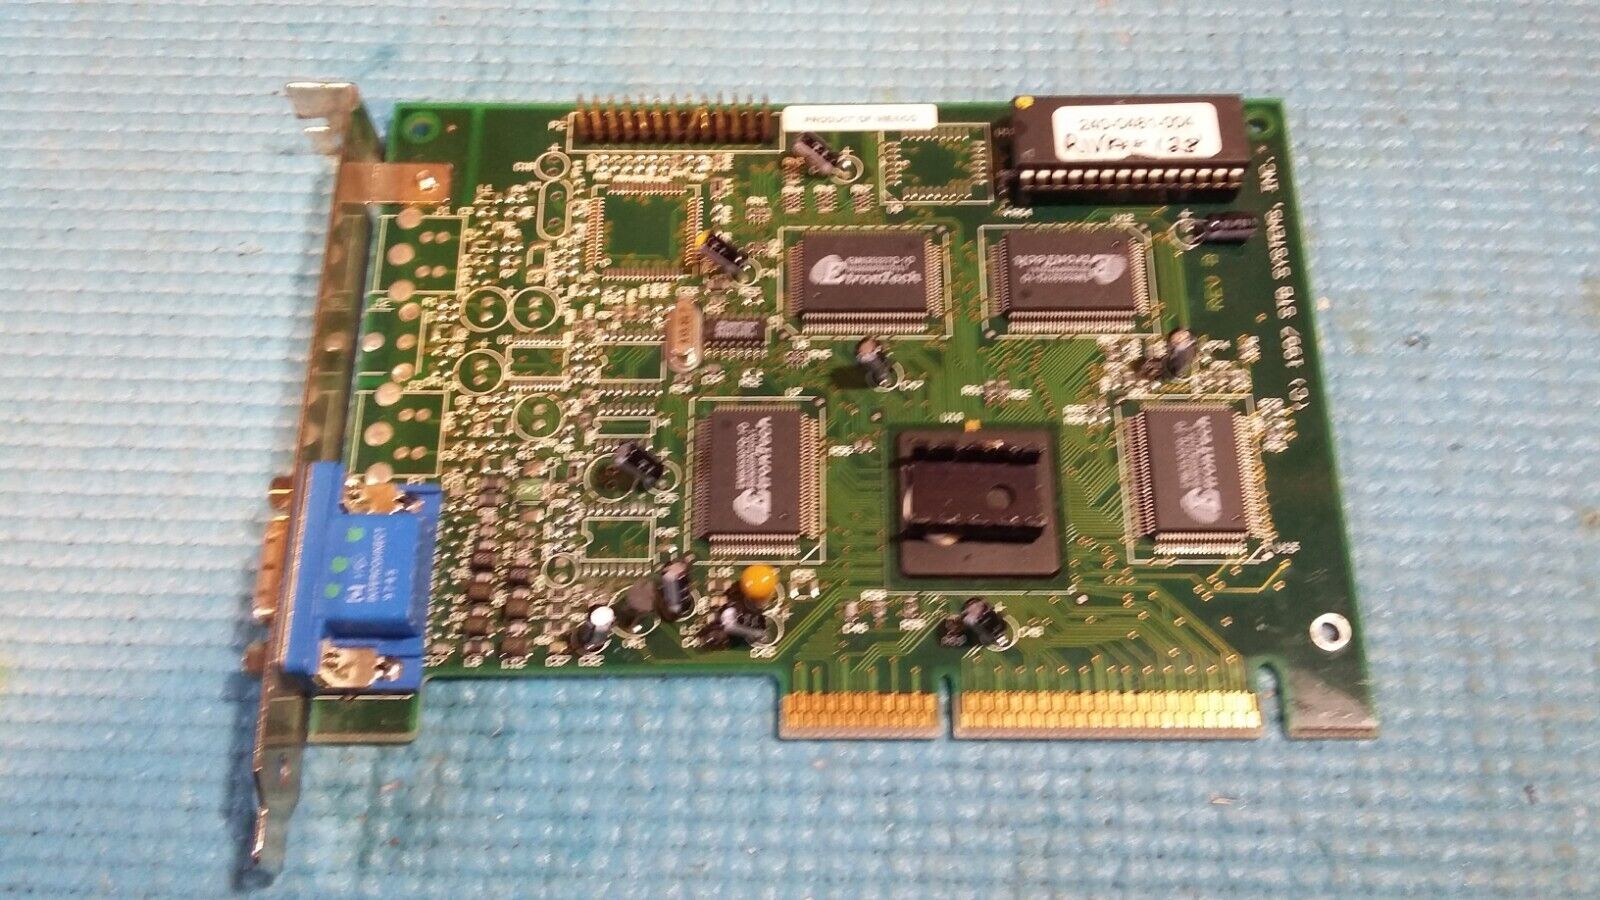 STB Velocity 128  RIVA 128 4MB AGP Graphics Video Card | Test bench pictures